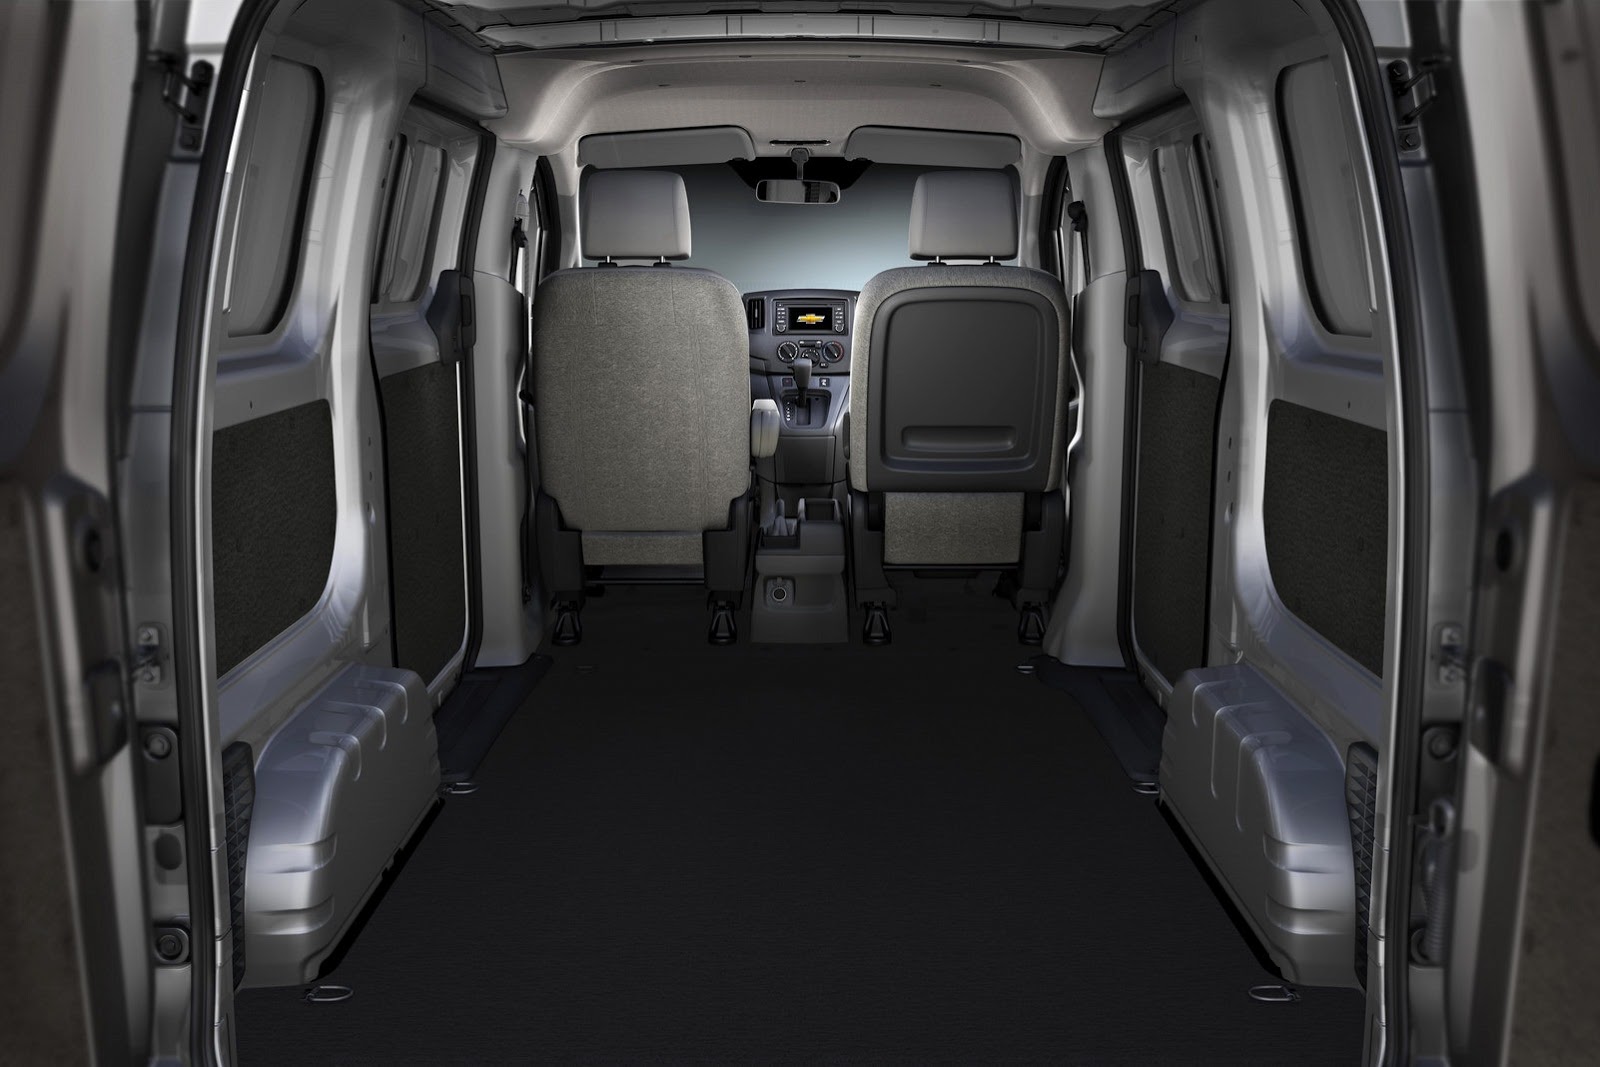 Chevrolet's 2015 City Express Is a Rebadged Nissan NV200 Van